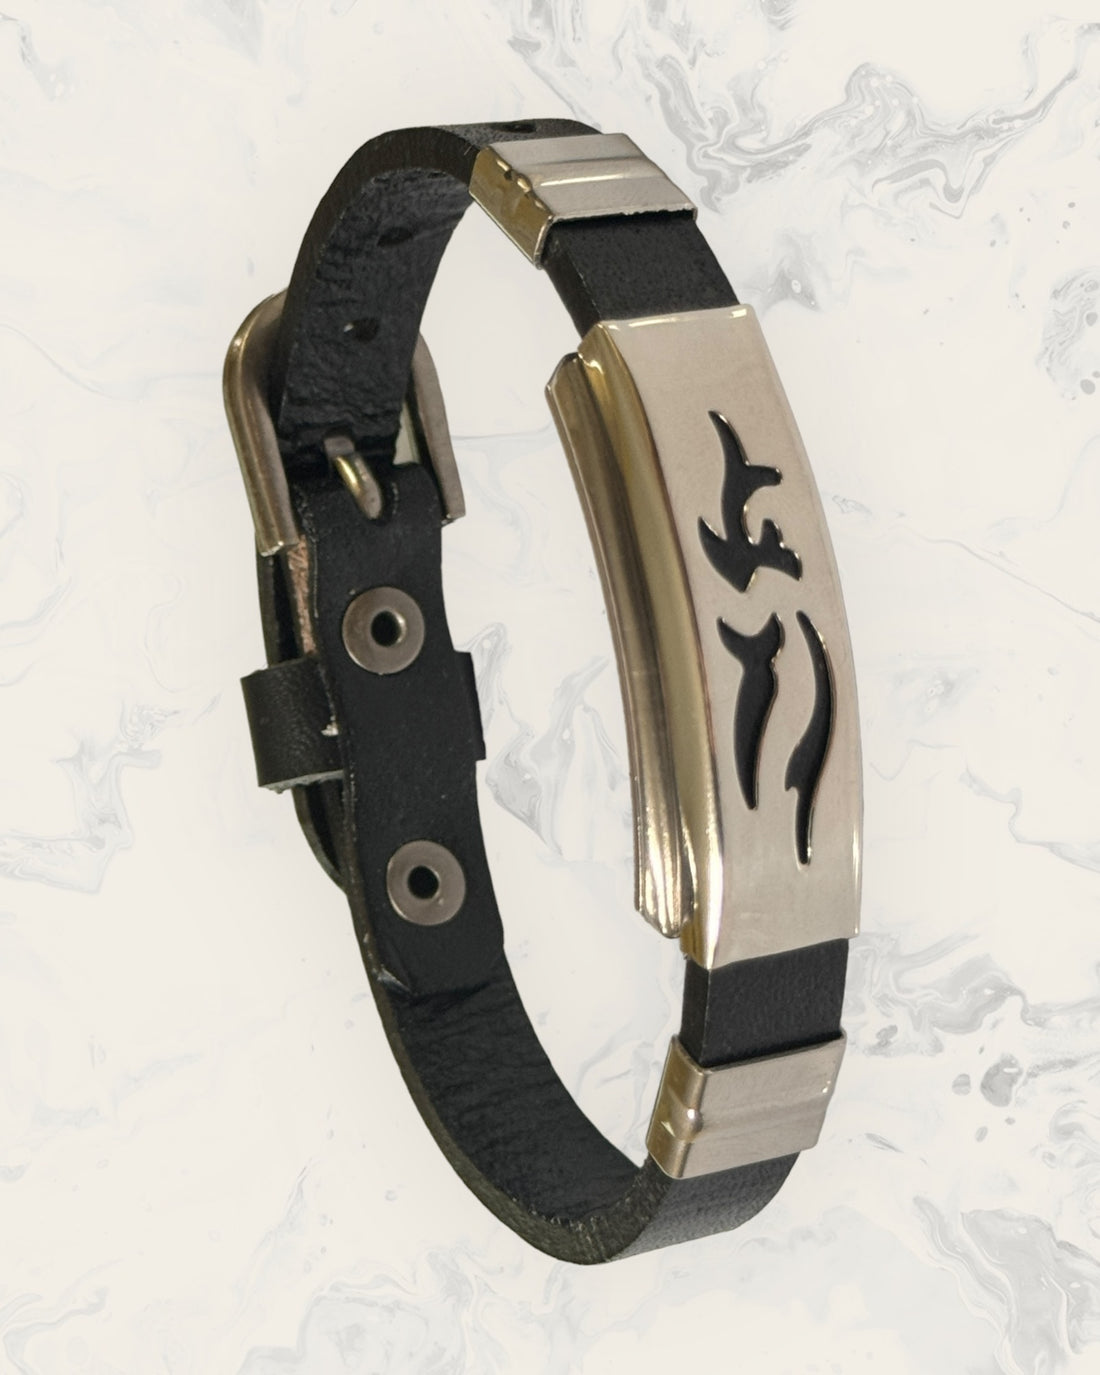 Natural Pain Relief and EMF Protection Bracelet Leather Band Color Black with Dolphin design on a silver metal slider